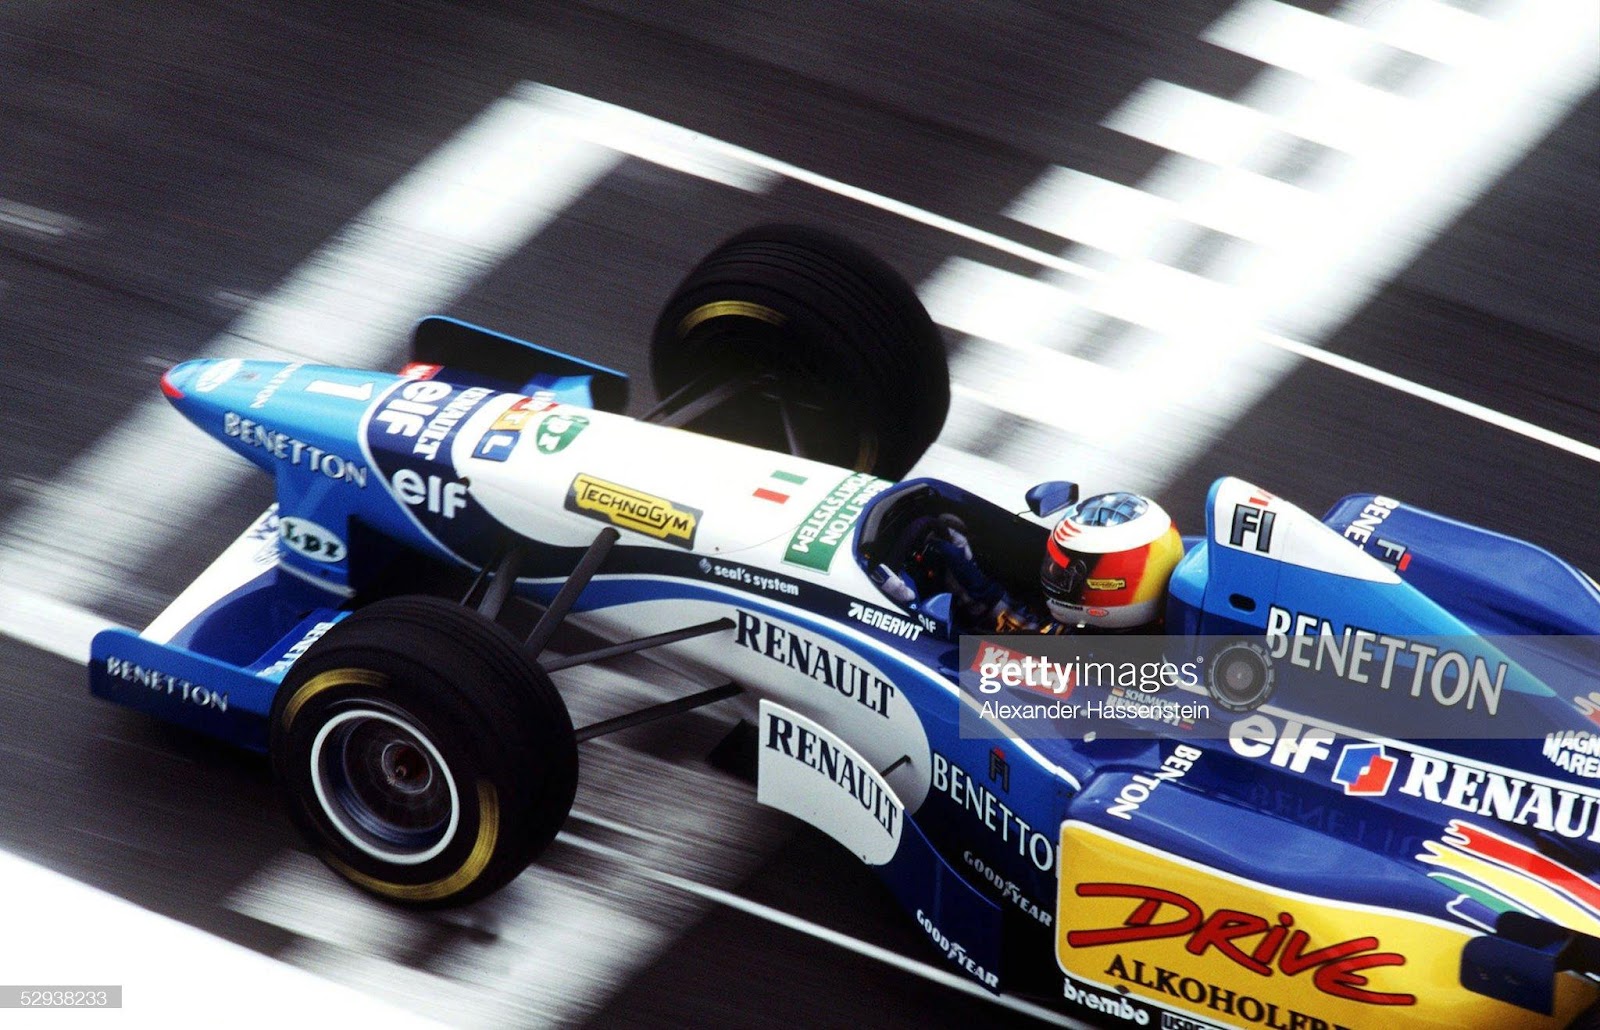 Michael Schumacher, Benetton Renault, at the French Grand Prix in Magny Cours on July 1, 1995.